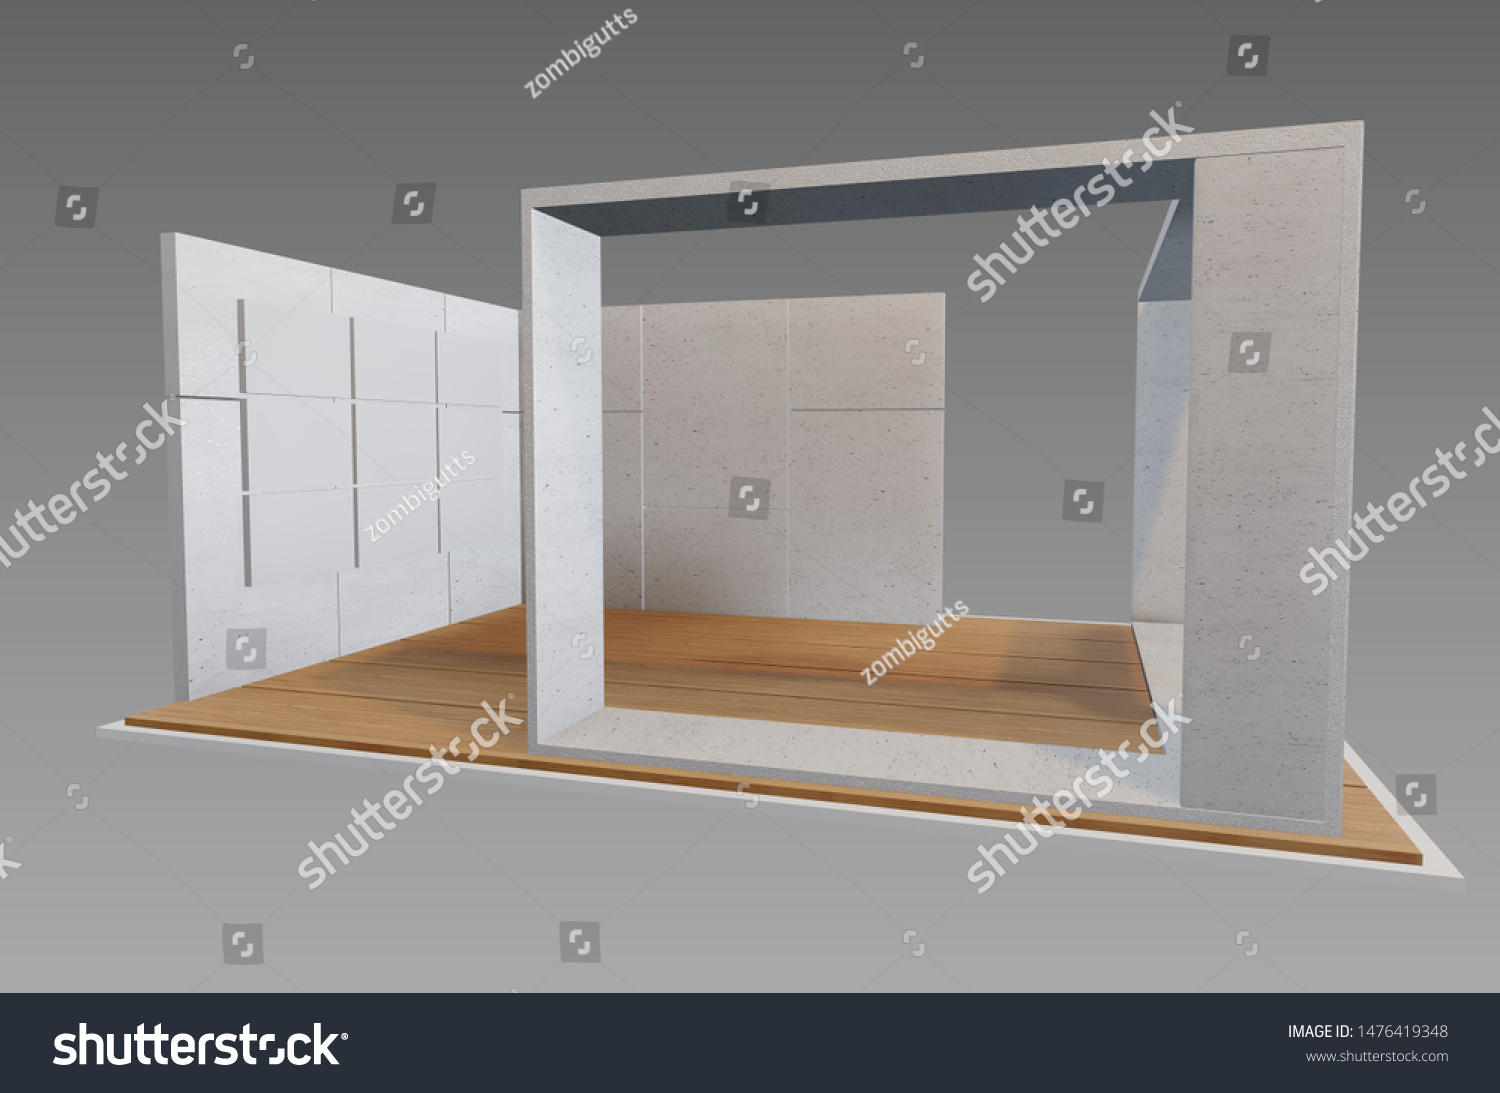 Plain white exhibition stand 3d illustration used for mock-ups and branding #1476419348